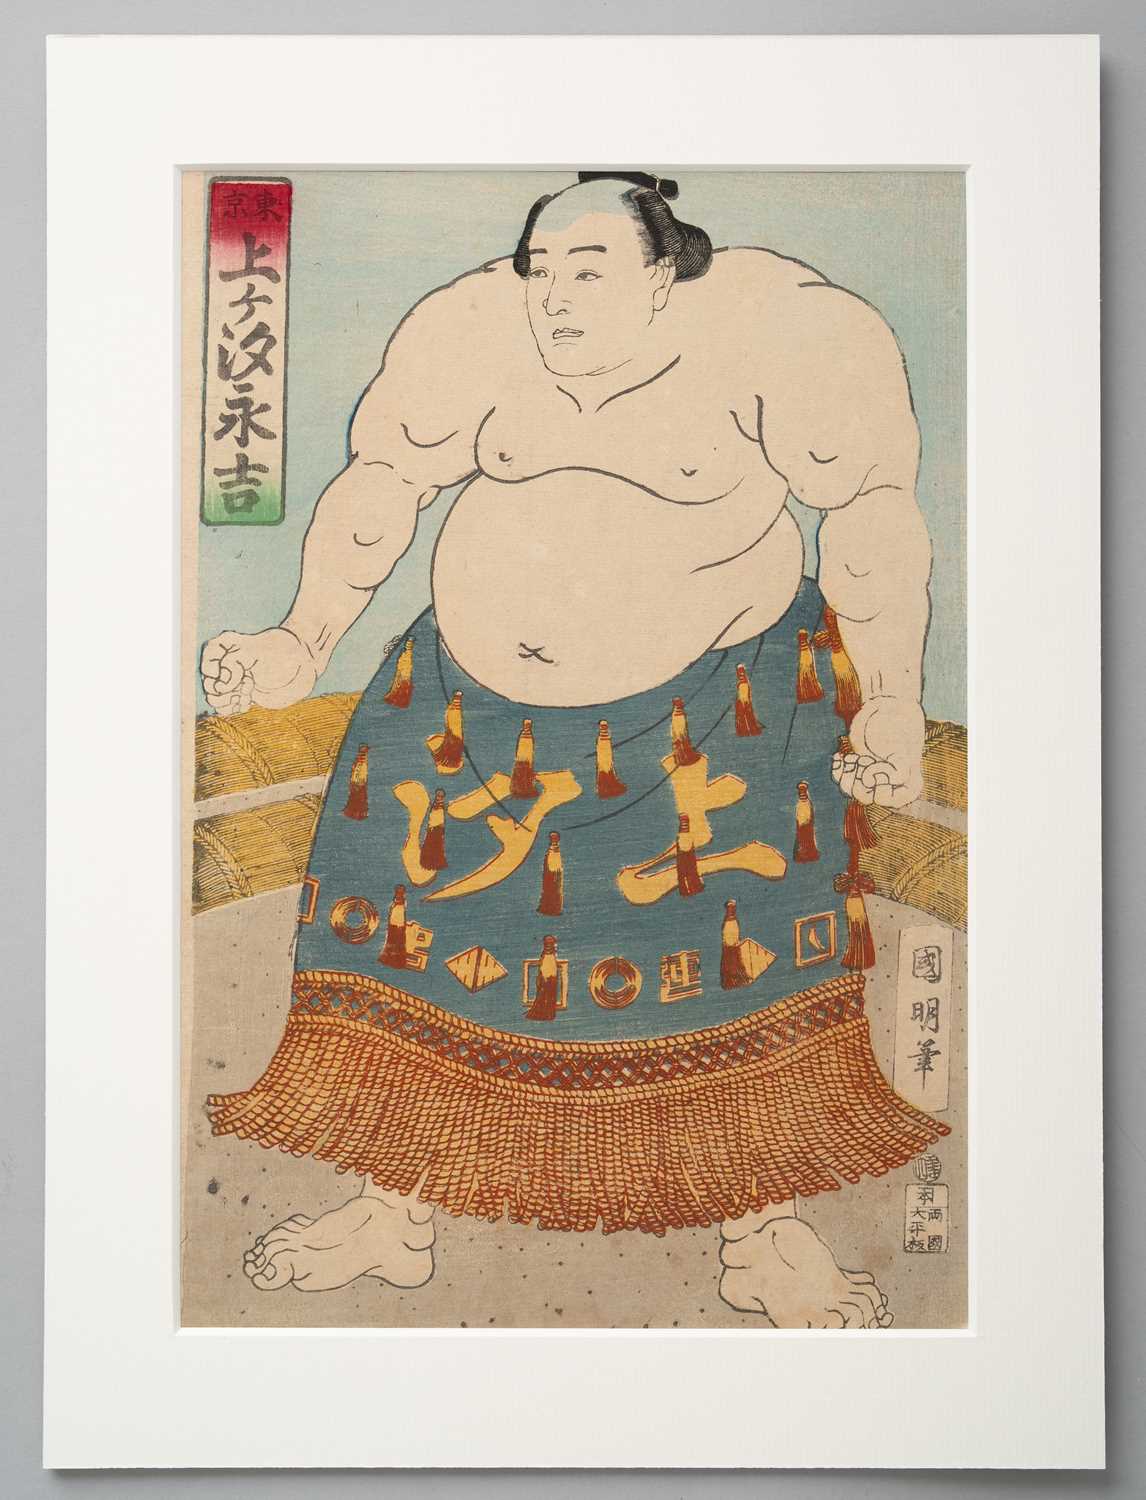 NO RESERVE UNIDENTIFIED ARTISTS SUMO-E (PORTRAITS OF SUMO WRESTLERS) EDO OR MEIJI, 19TH CENTURY A - Image 9 of 9